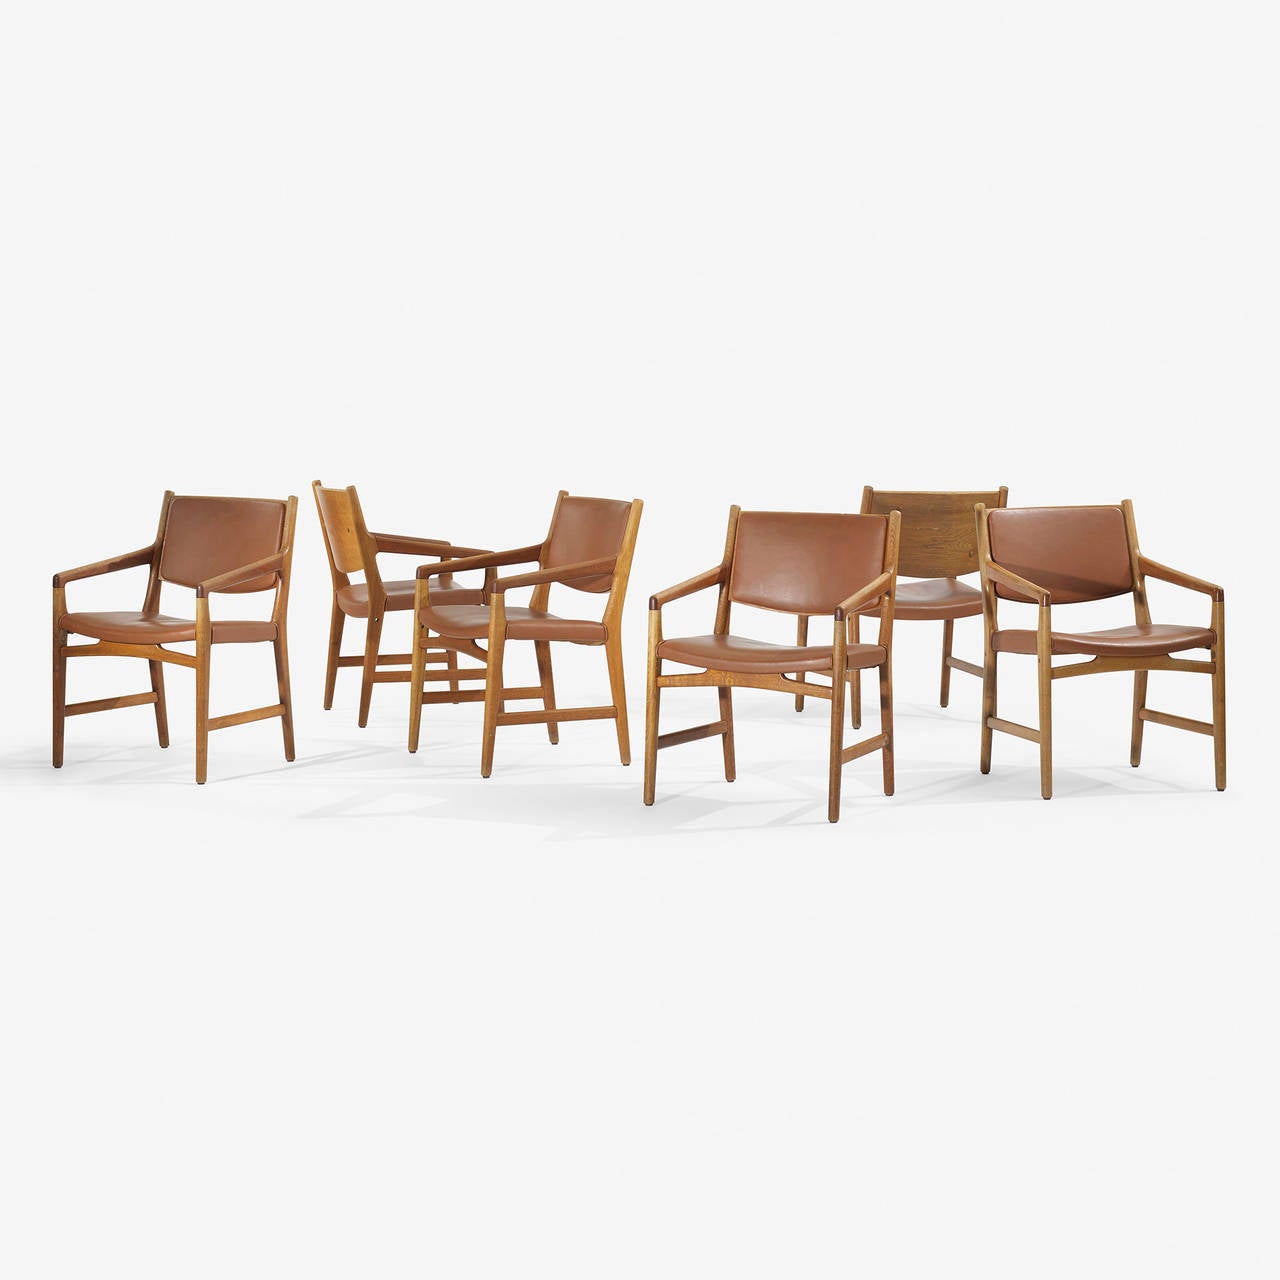 This design was custom-ordered for the interior of Magasin du Nord's department stores in the 1950s. Few were produced and this rare set comes from the collection of a former employee of Magasin du Nord’s Odense location. The set has remained in the